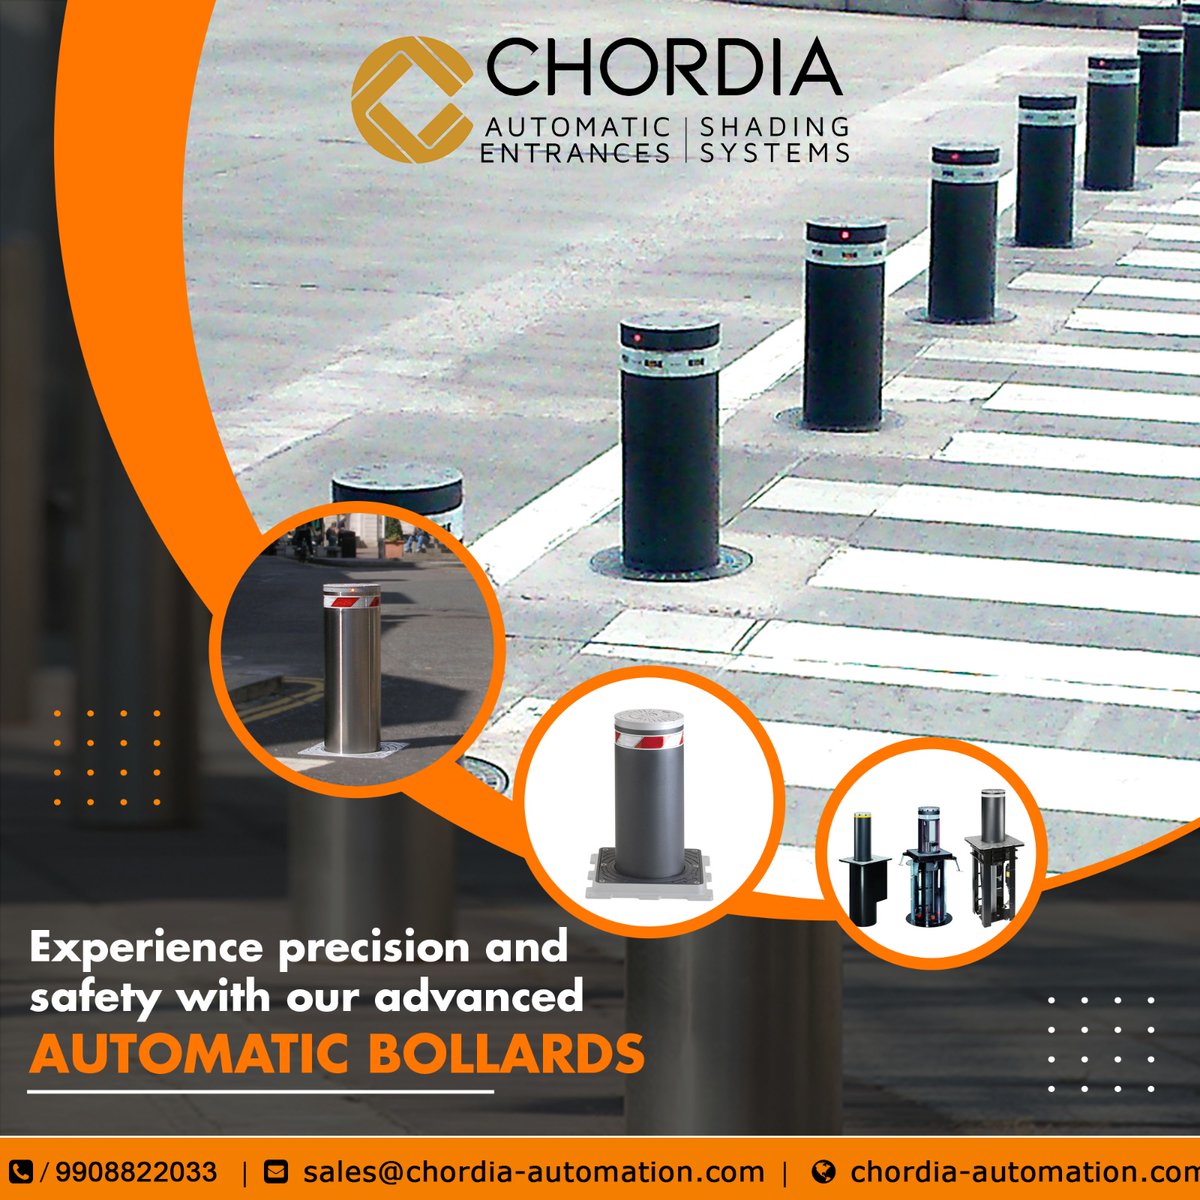 Experience hassle-free access control with our automated bollards.  

For enquires visit @ chordia-automation.com 

#automation #technology #engineering #innovation #mechanical #automationengineering #automaticbollards #chordiaautomation #hyderabad #homeautomation #ai